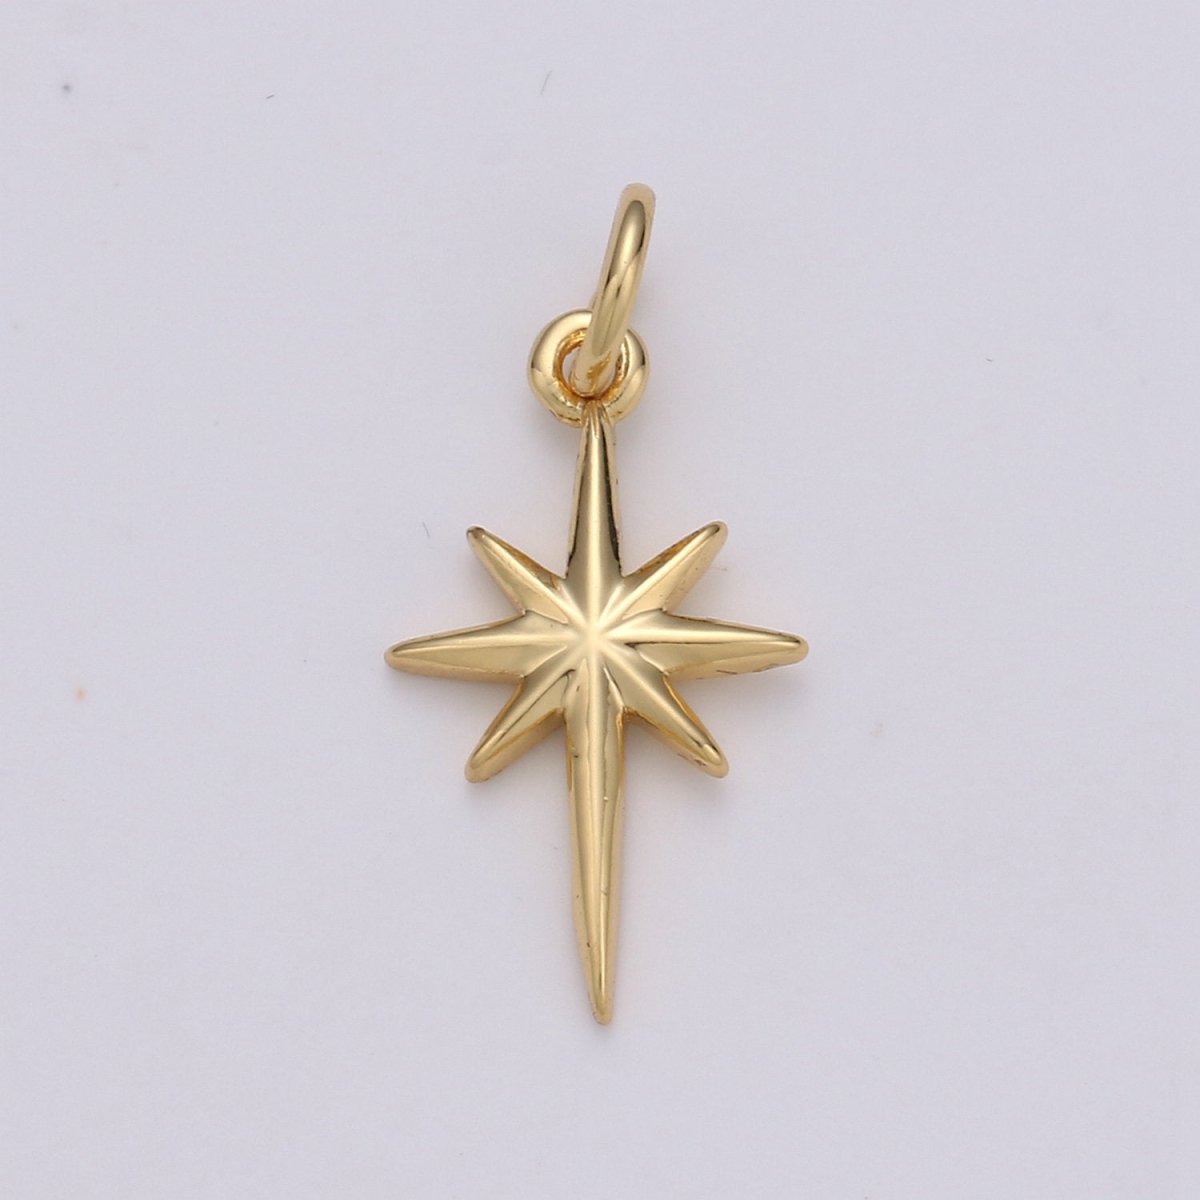 Dainty Gold North Star Charm Necklace, Bethlehem Star Pendant in Silver Celestial Jewelry Making Supply D-450 D-451 - DLUXCA